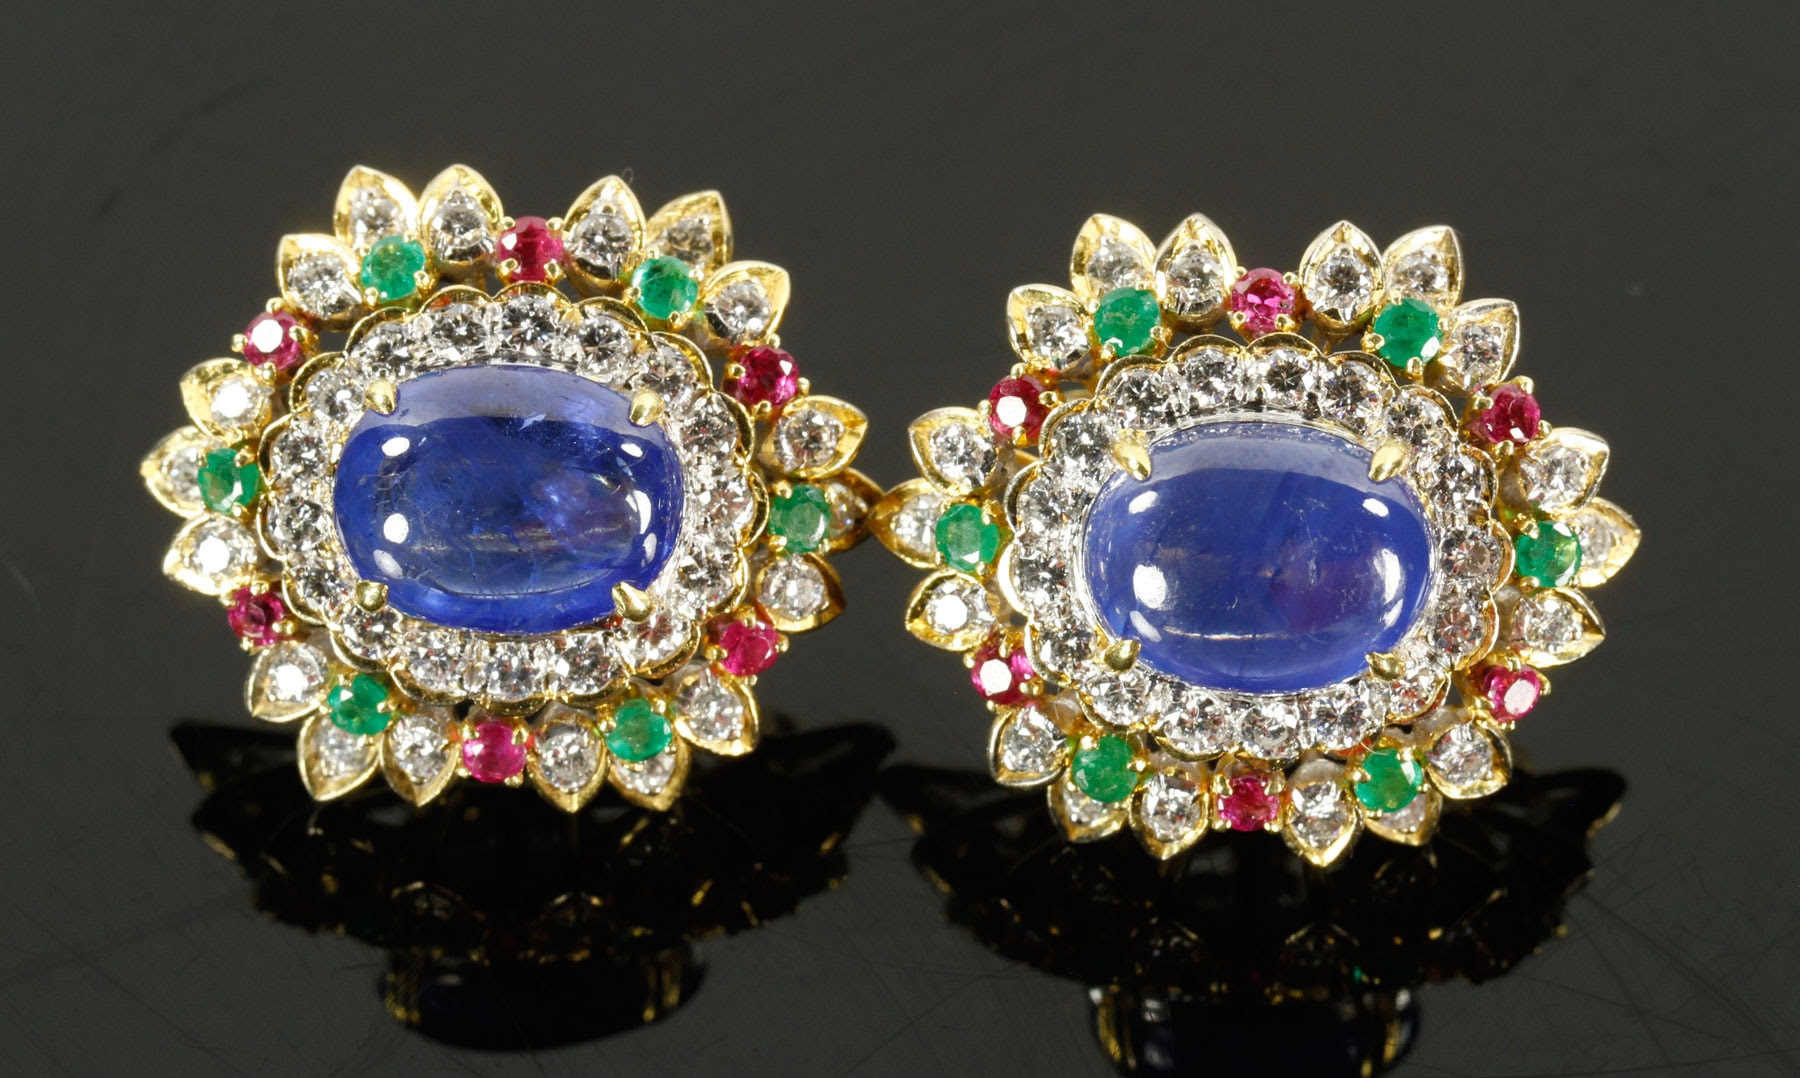 Gold earrings, 18K gold, set with cabochon sapphires, diamonds, rubies and emeralds. Kaminski Auctions image